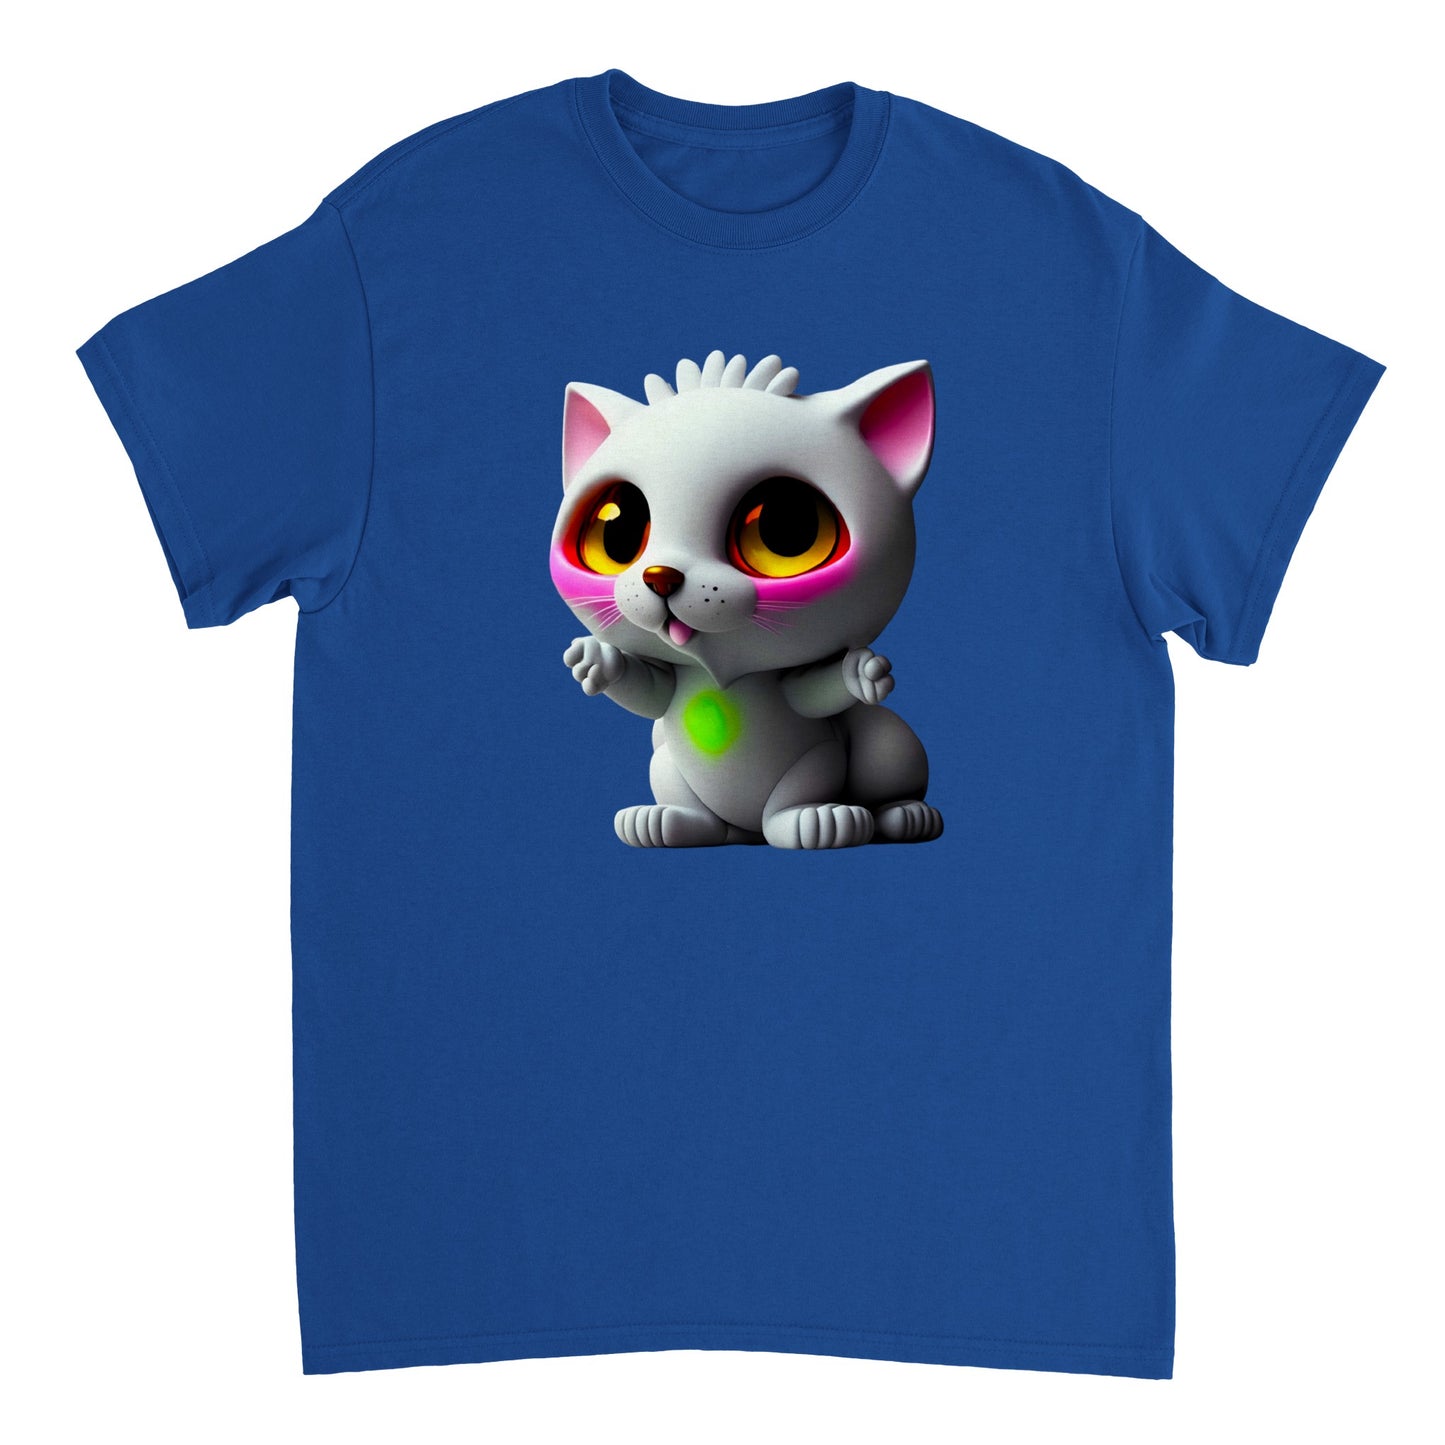 Adorable, Cool, Cute Cats and Kittens Toy - Heavyweight Unisex Crewneck T-shirt 60